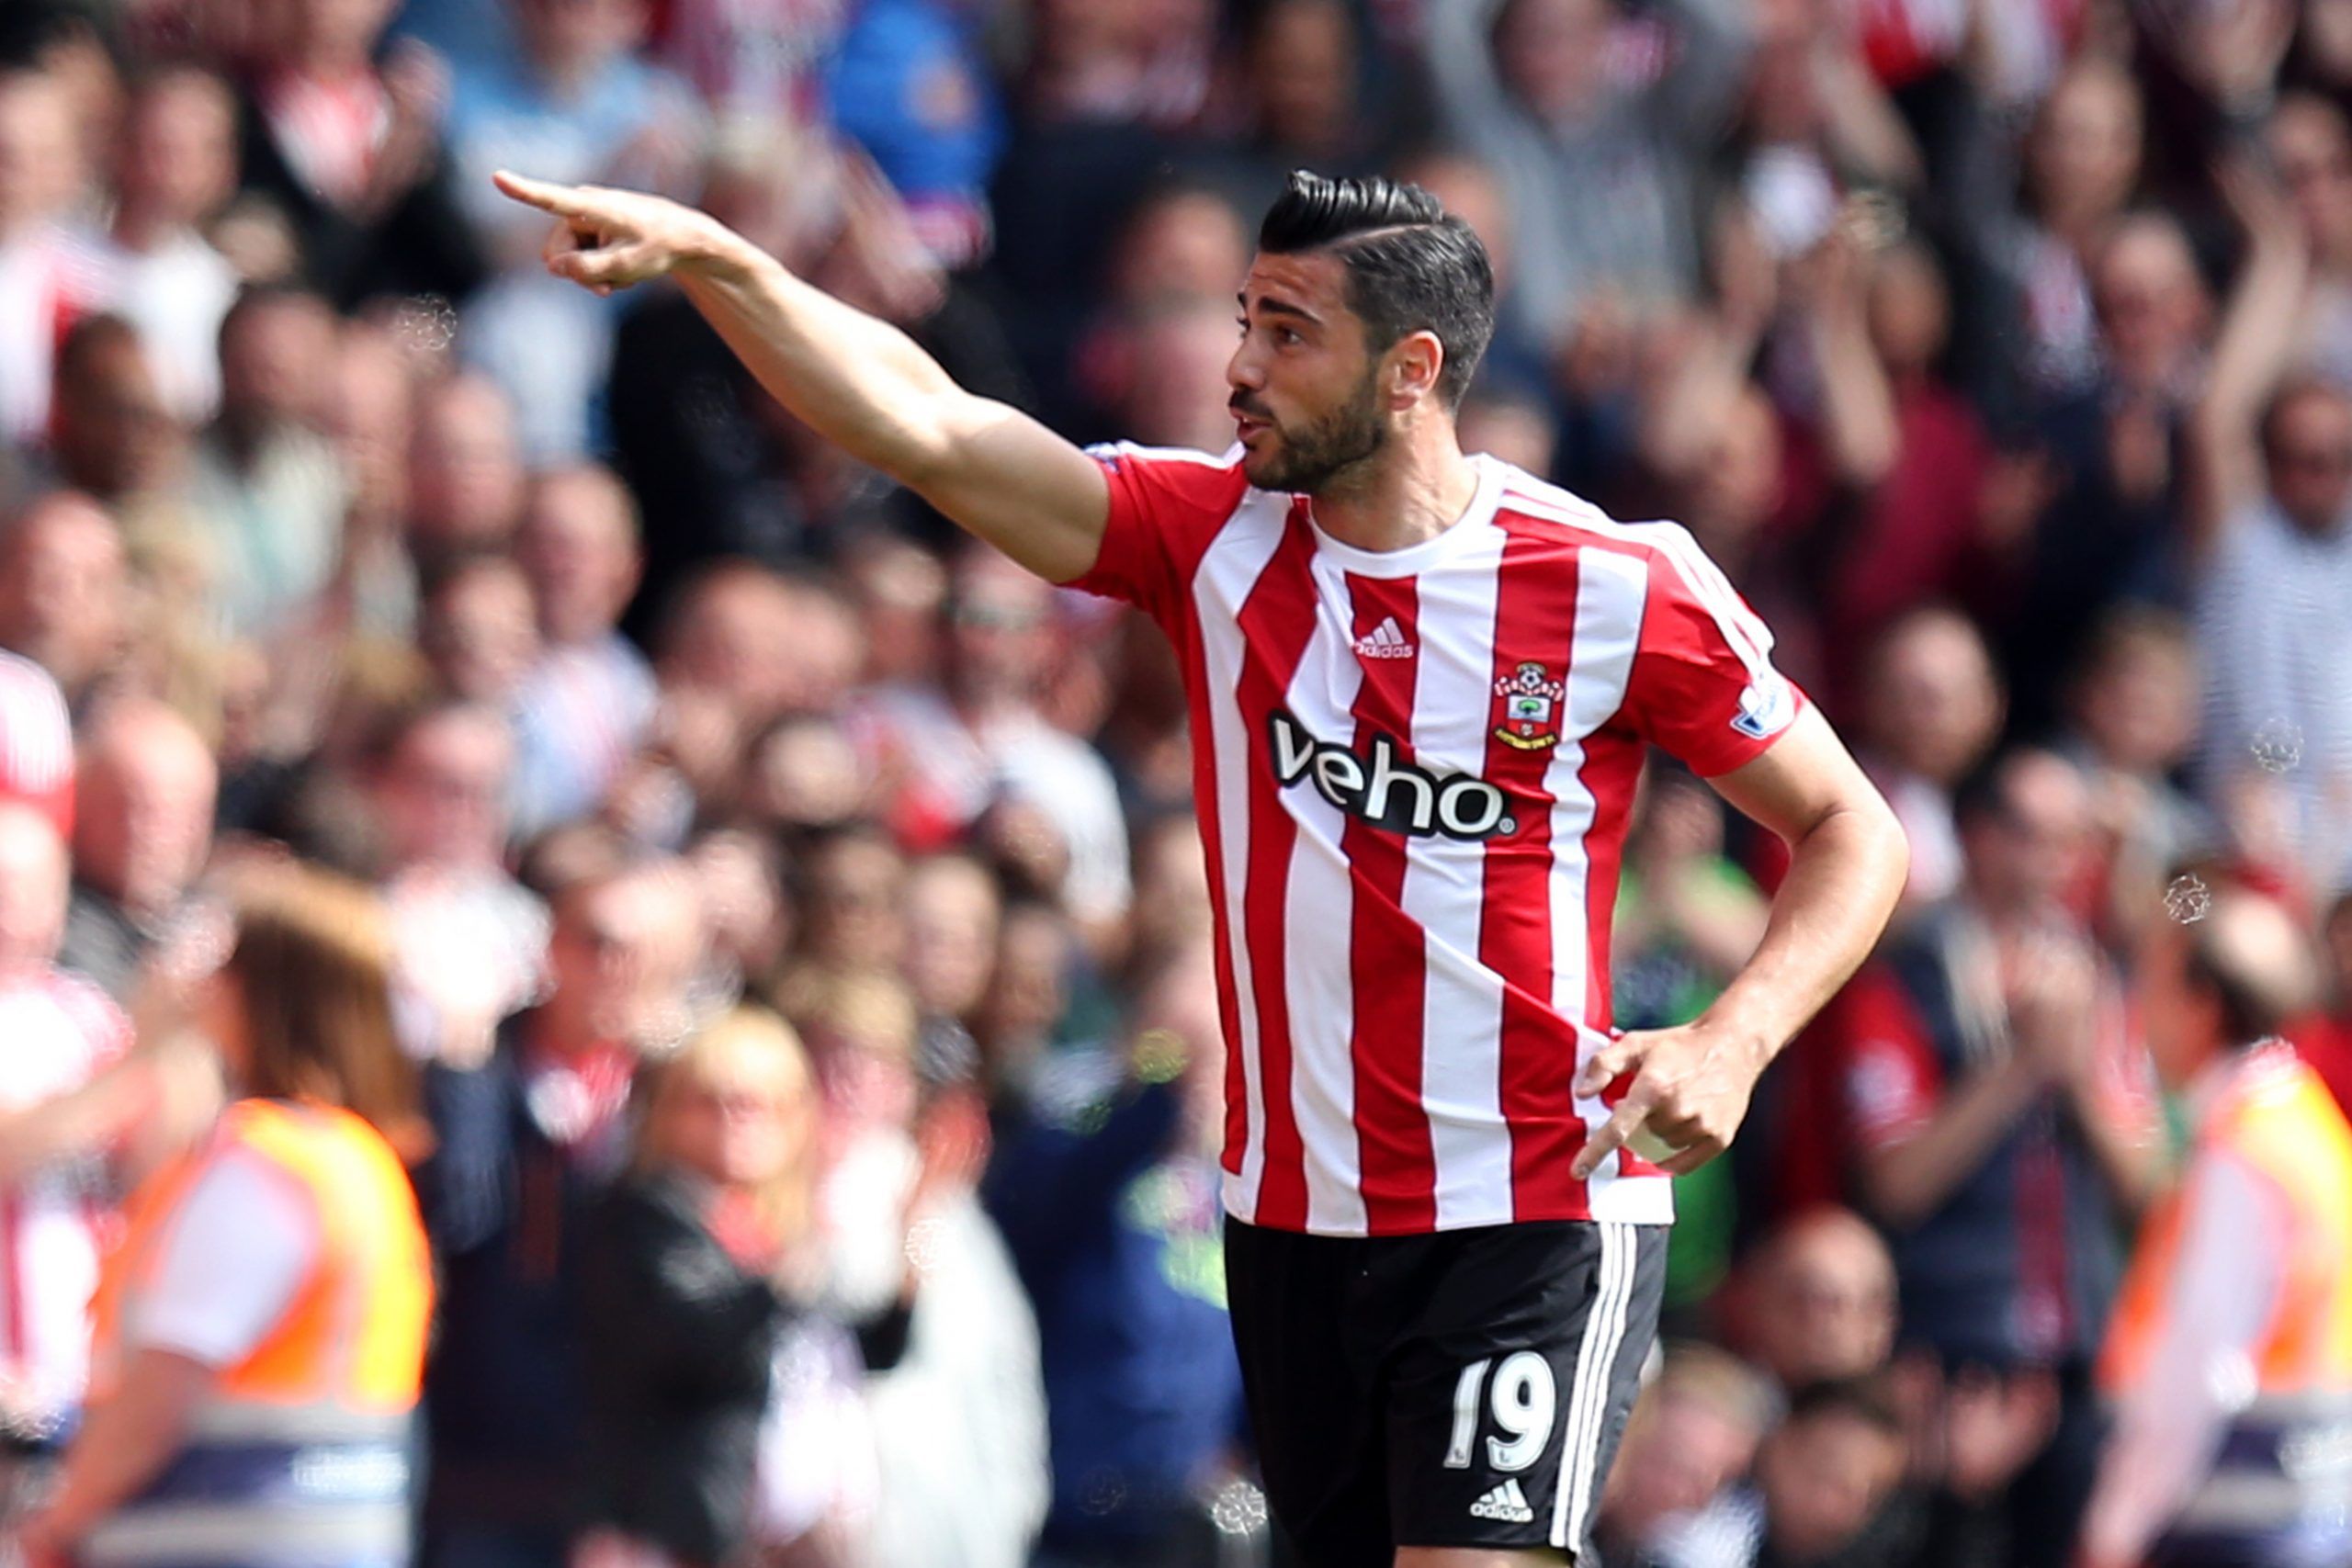 Britain Soccer Football - Southampton v Crystal Palace - Barclays Premier League - St Mary's Stadium - 15/5/16 
Graziano Pelle celebrates as gestures towards Kelvin Davis after scoring the second goal for Southampton  
Action Images via Reuters / Paul Childs 
Livepic 
EDITORIAL USE ONLY. No use with unauthorized audio, video, data, fixture lists, club/league logos or 